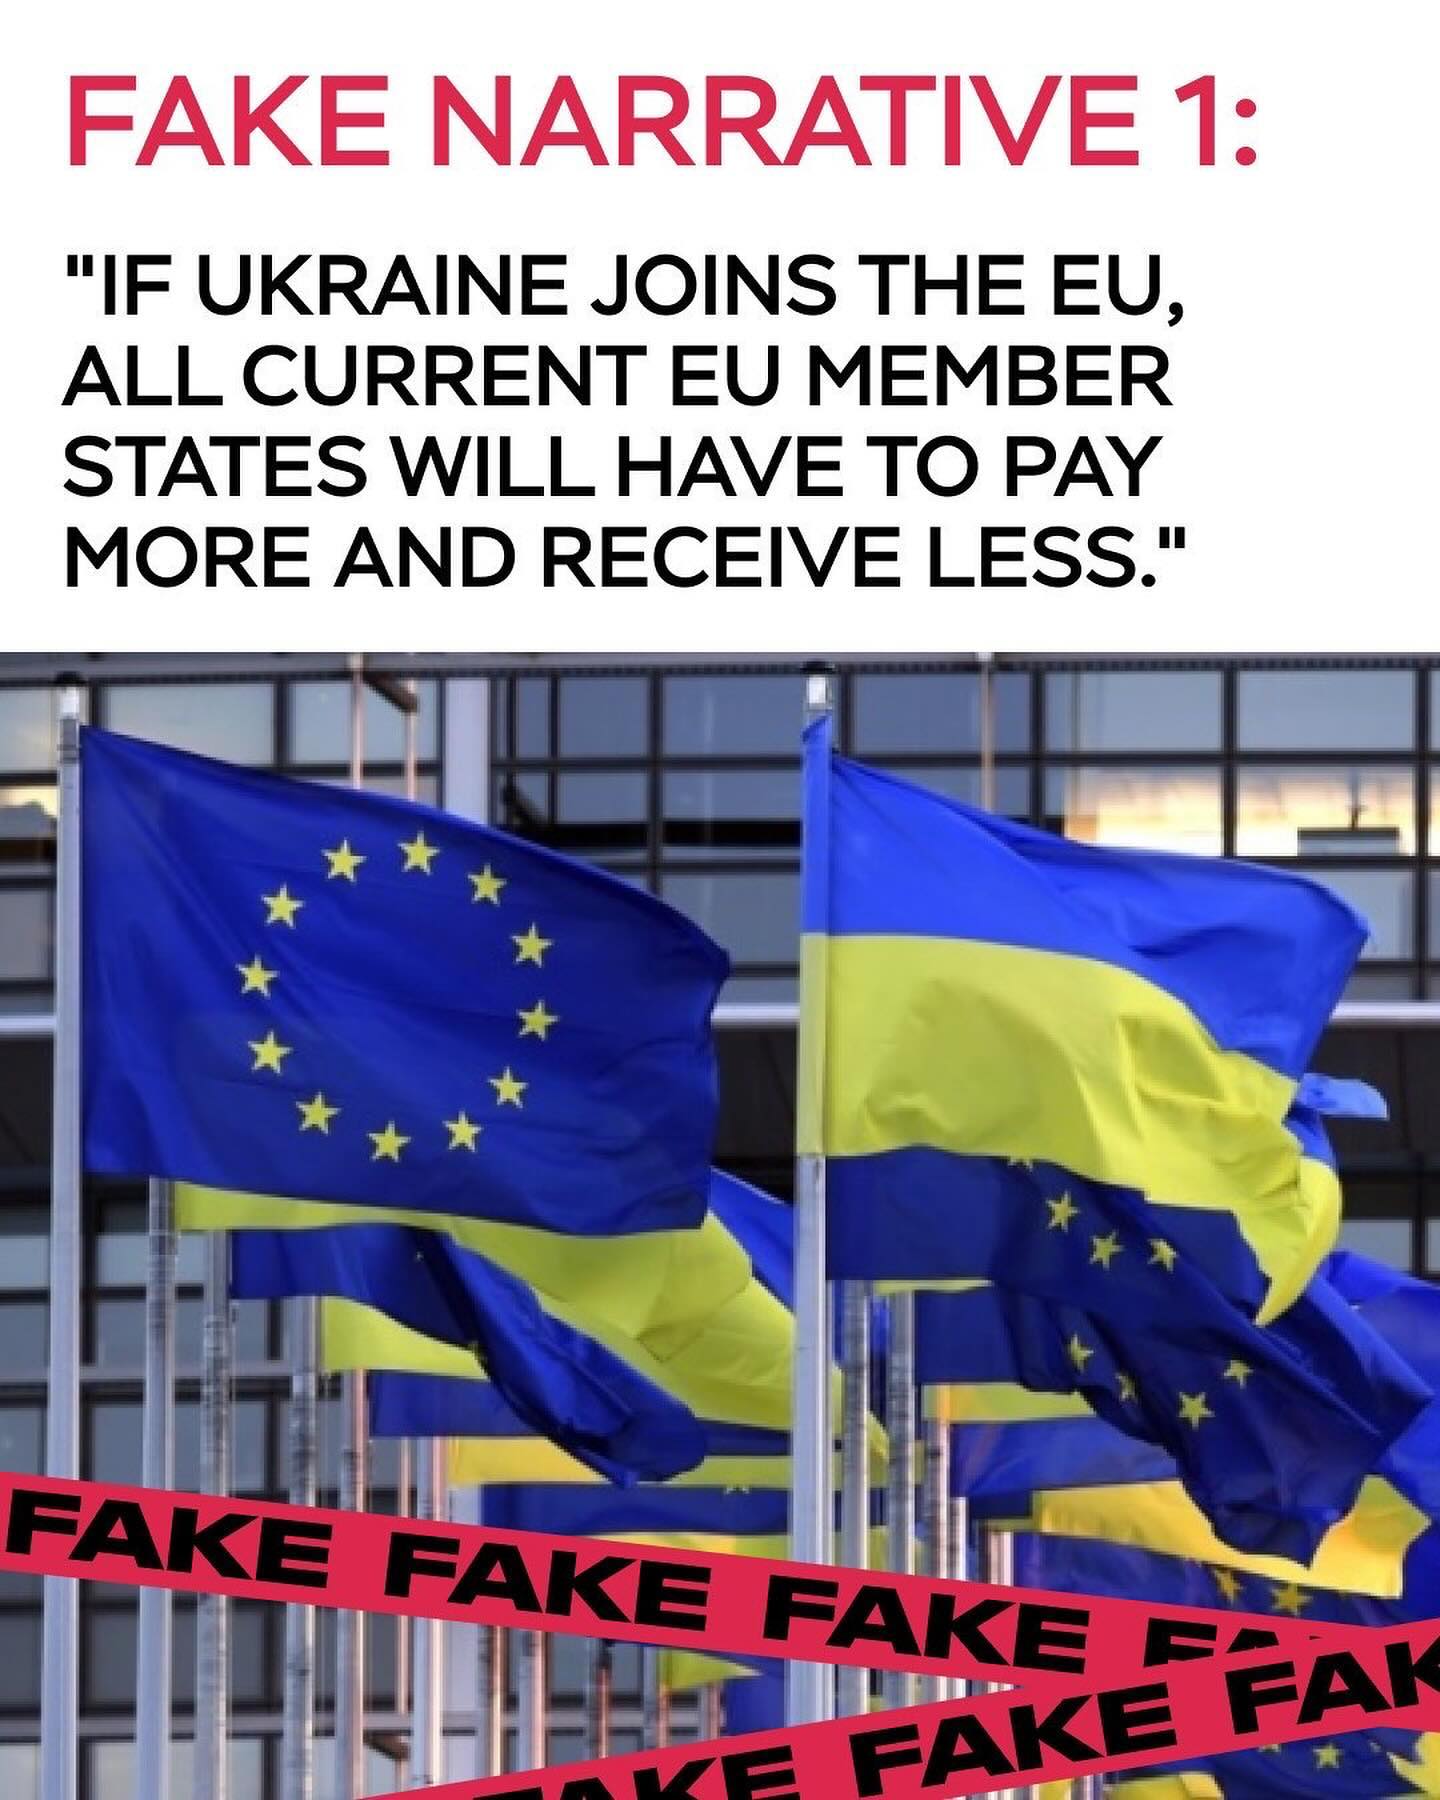 Today, together with the PU Advocacy team, we are launching a social media campaign aimed at unraveling fake narratives about Ukraine and highlighting the truth